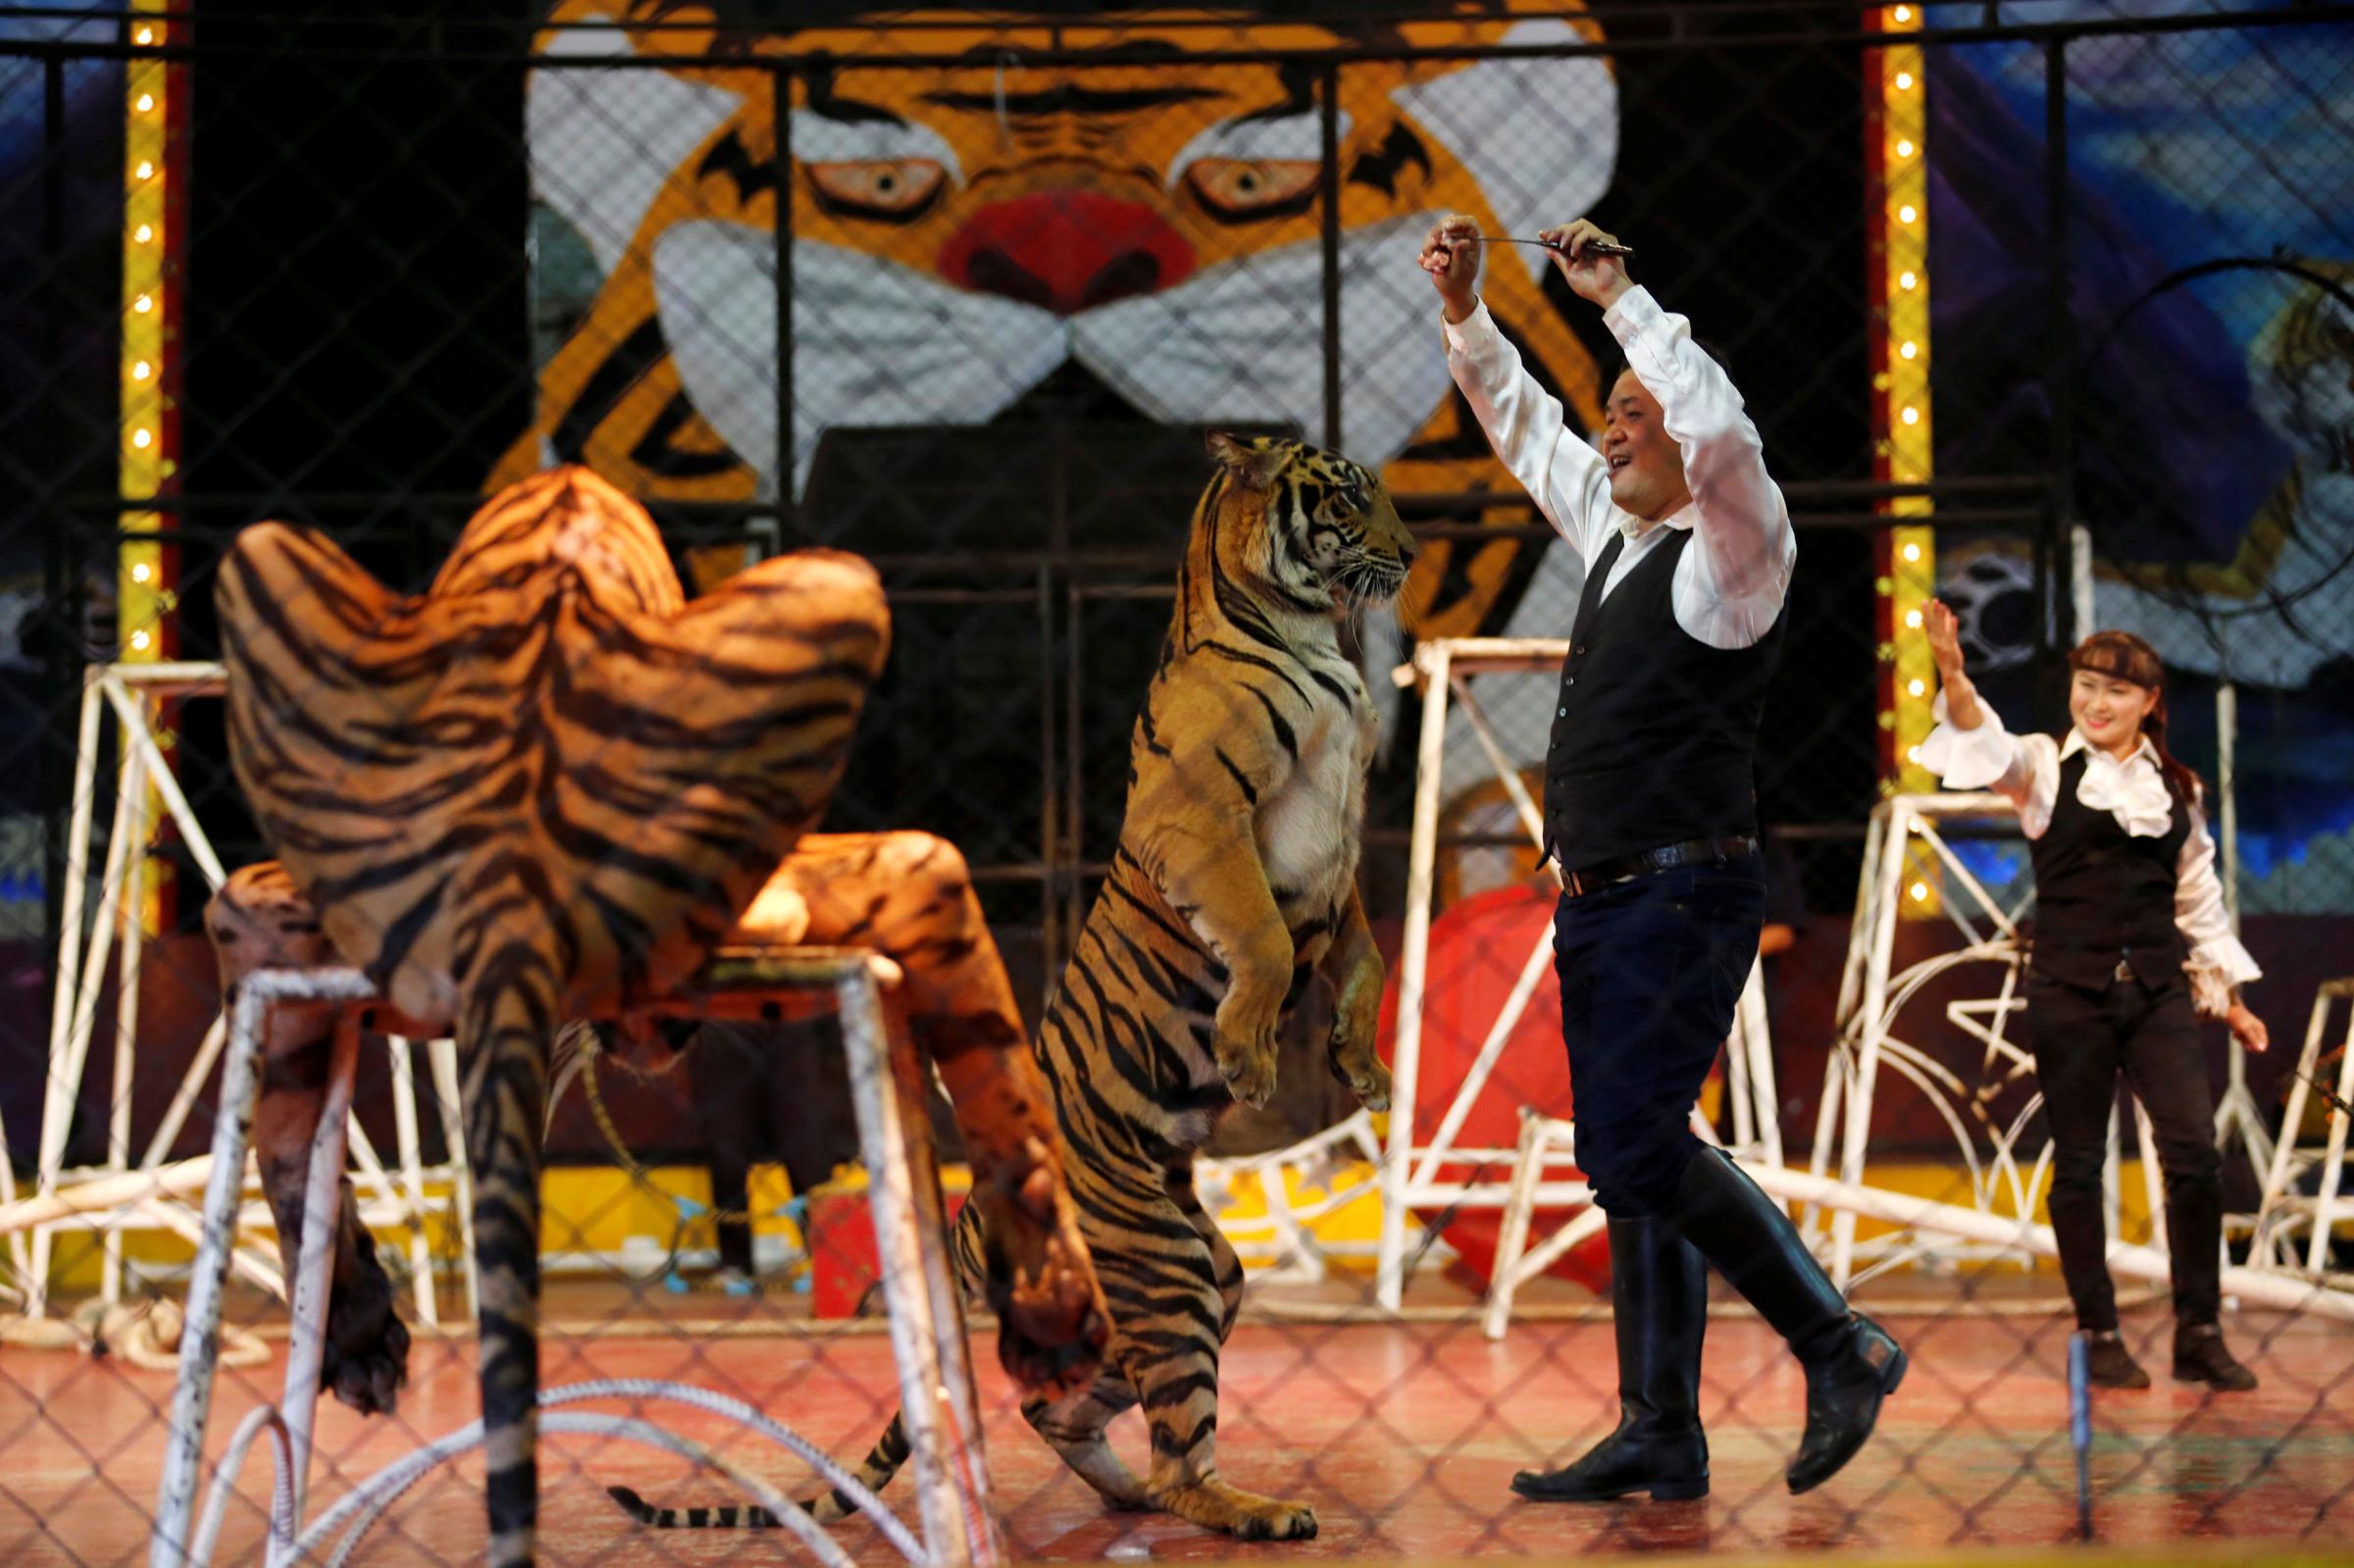 A trainer plays with a tiger during a performance for tourists at the Sriracha Tiger Zoo, in Chonburi province